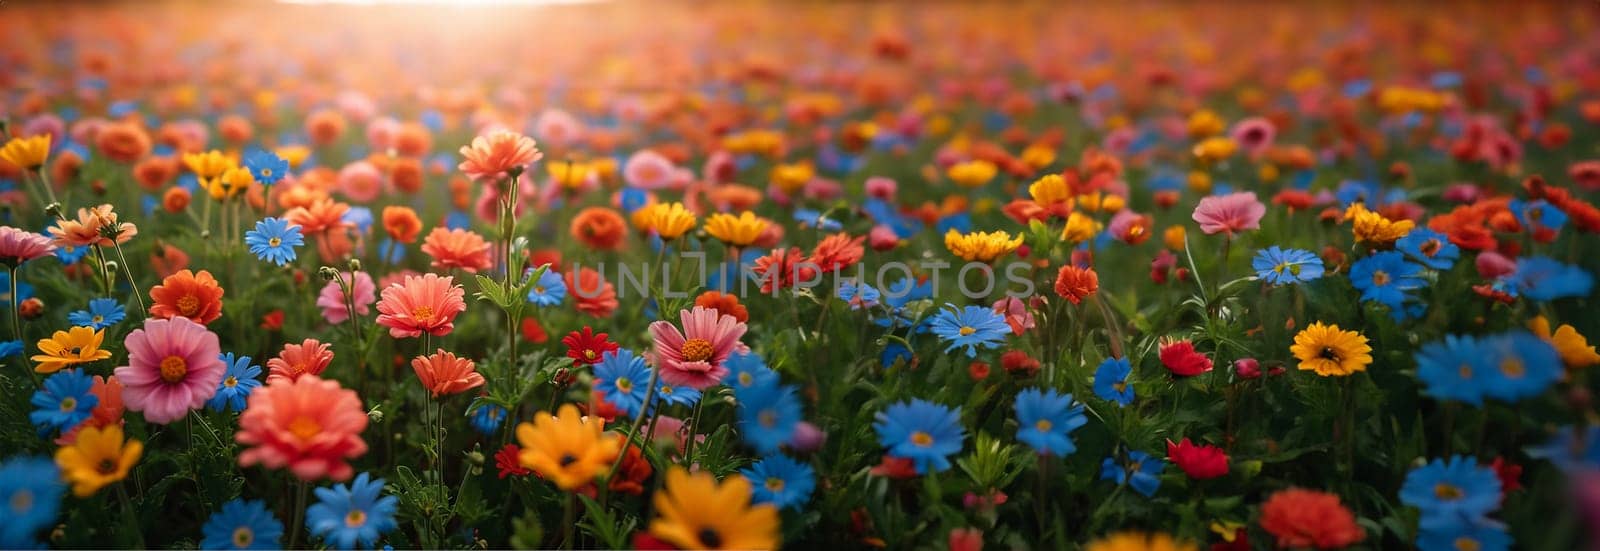 Colorful spring flowers in the sun. Various colored. Summer alpine meadow with colorful wildflowers. Camera moves among grass and colorful flowers, backlight, sunset. Summer alpine green flora background beauty by Annebel146